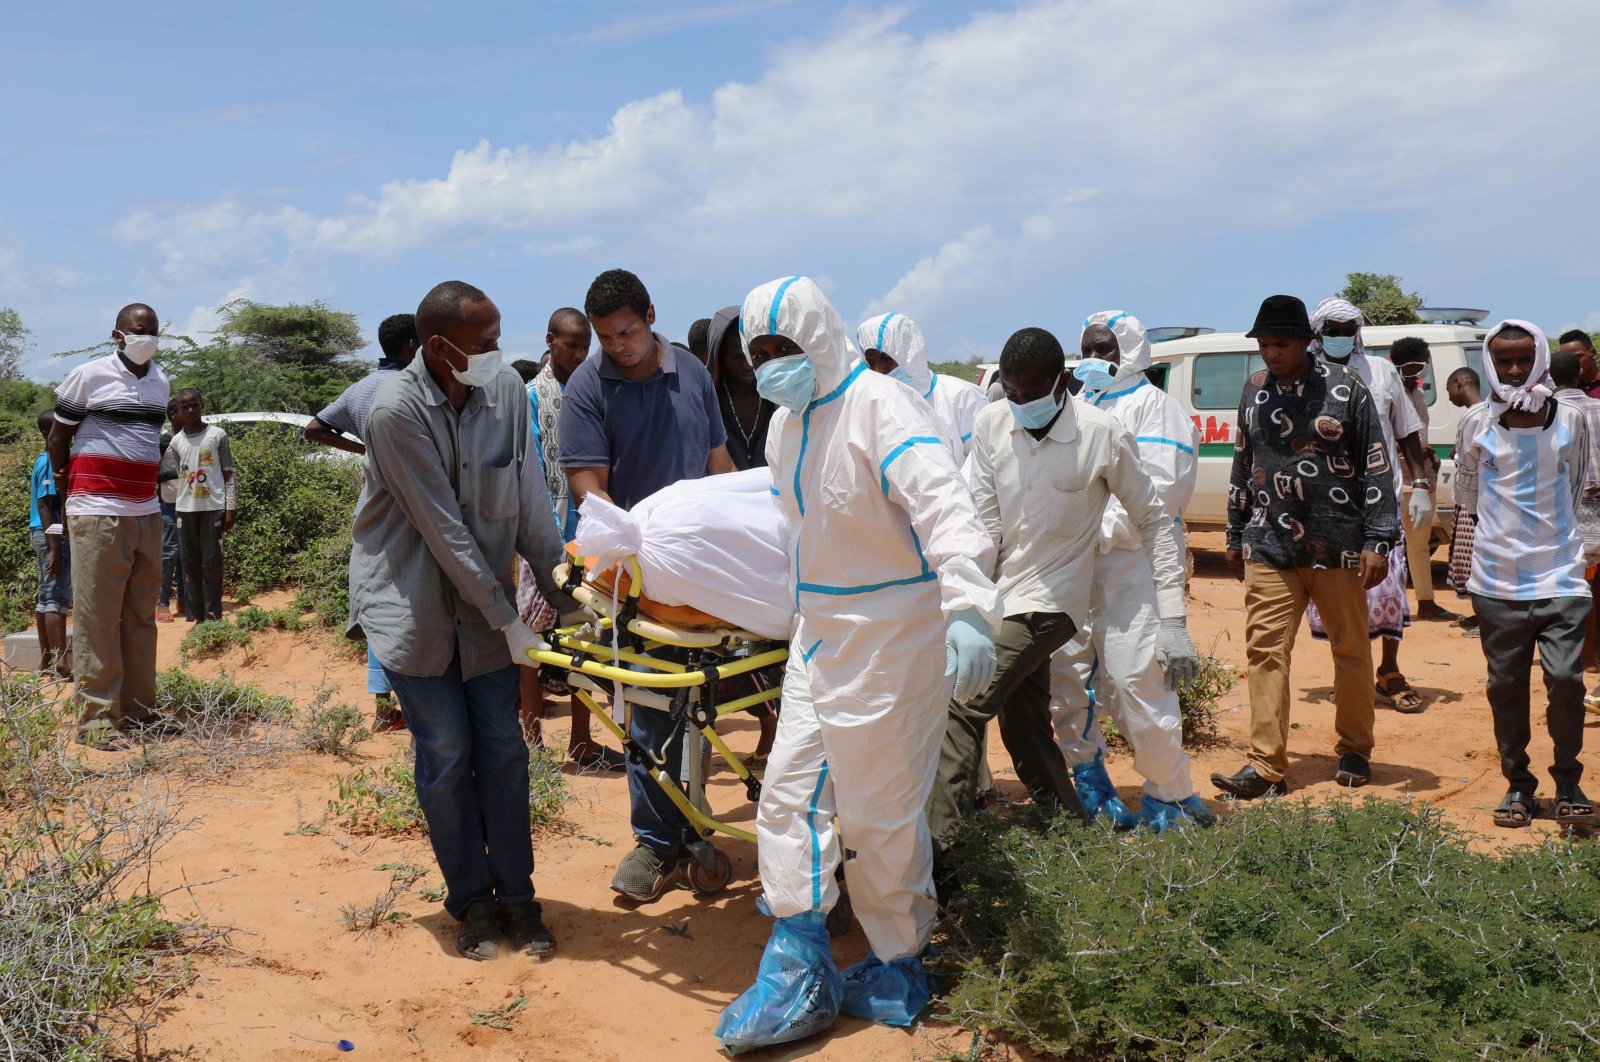 Somali workers in protective suits and civilians carry the body of a man suspected to have died of the coronavirus disease, for burial in Madina district outside of Mogadishu, Somalia April 30, 2020. REUTERS